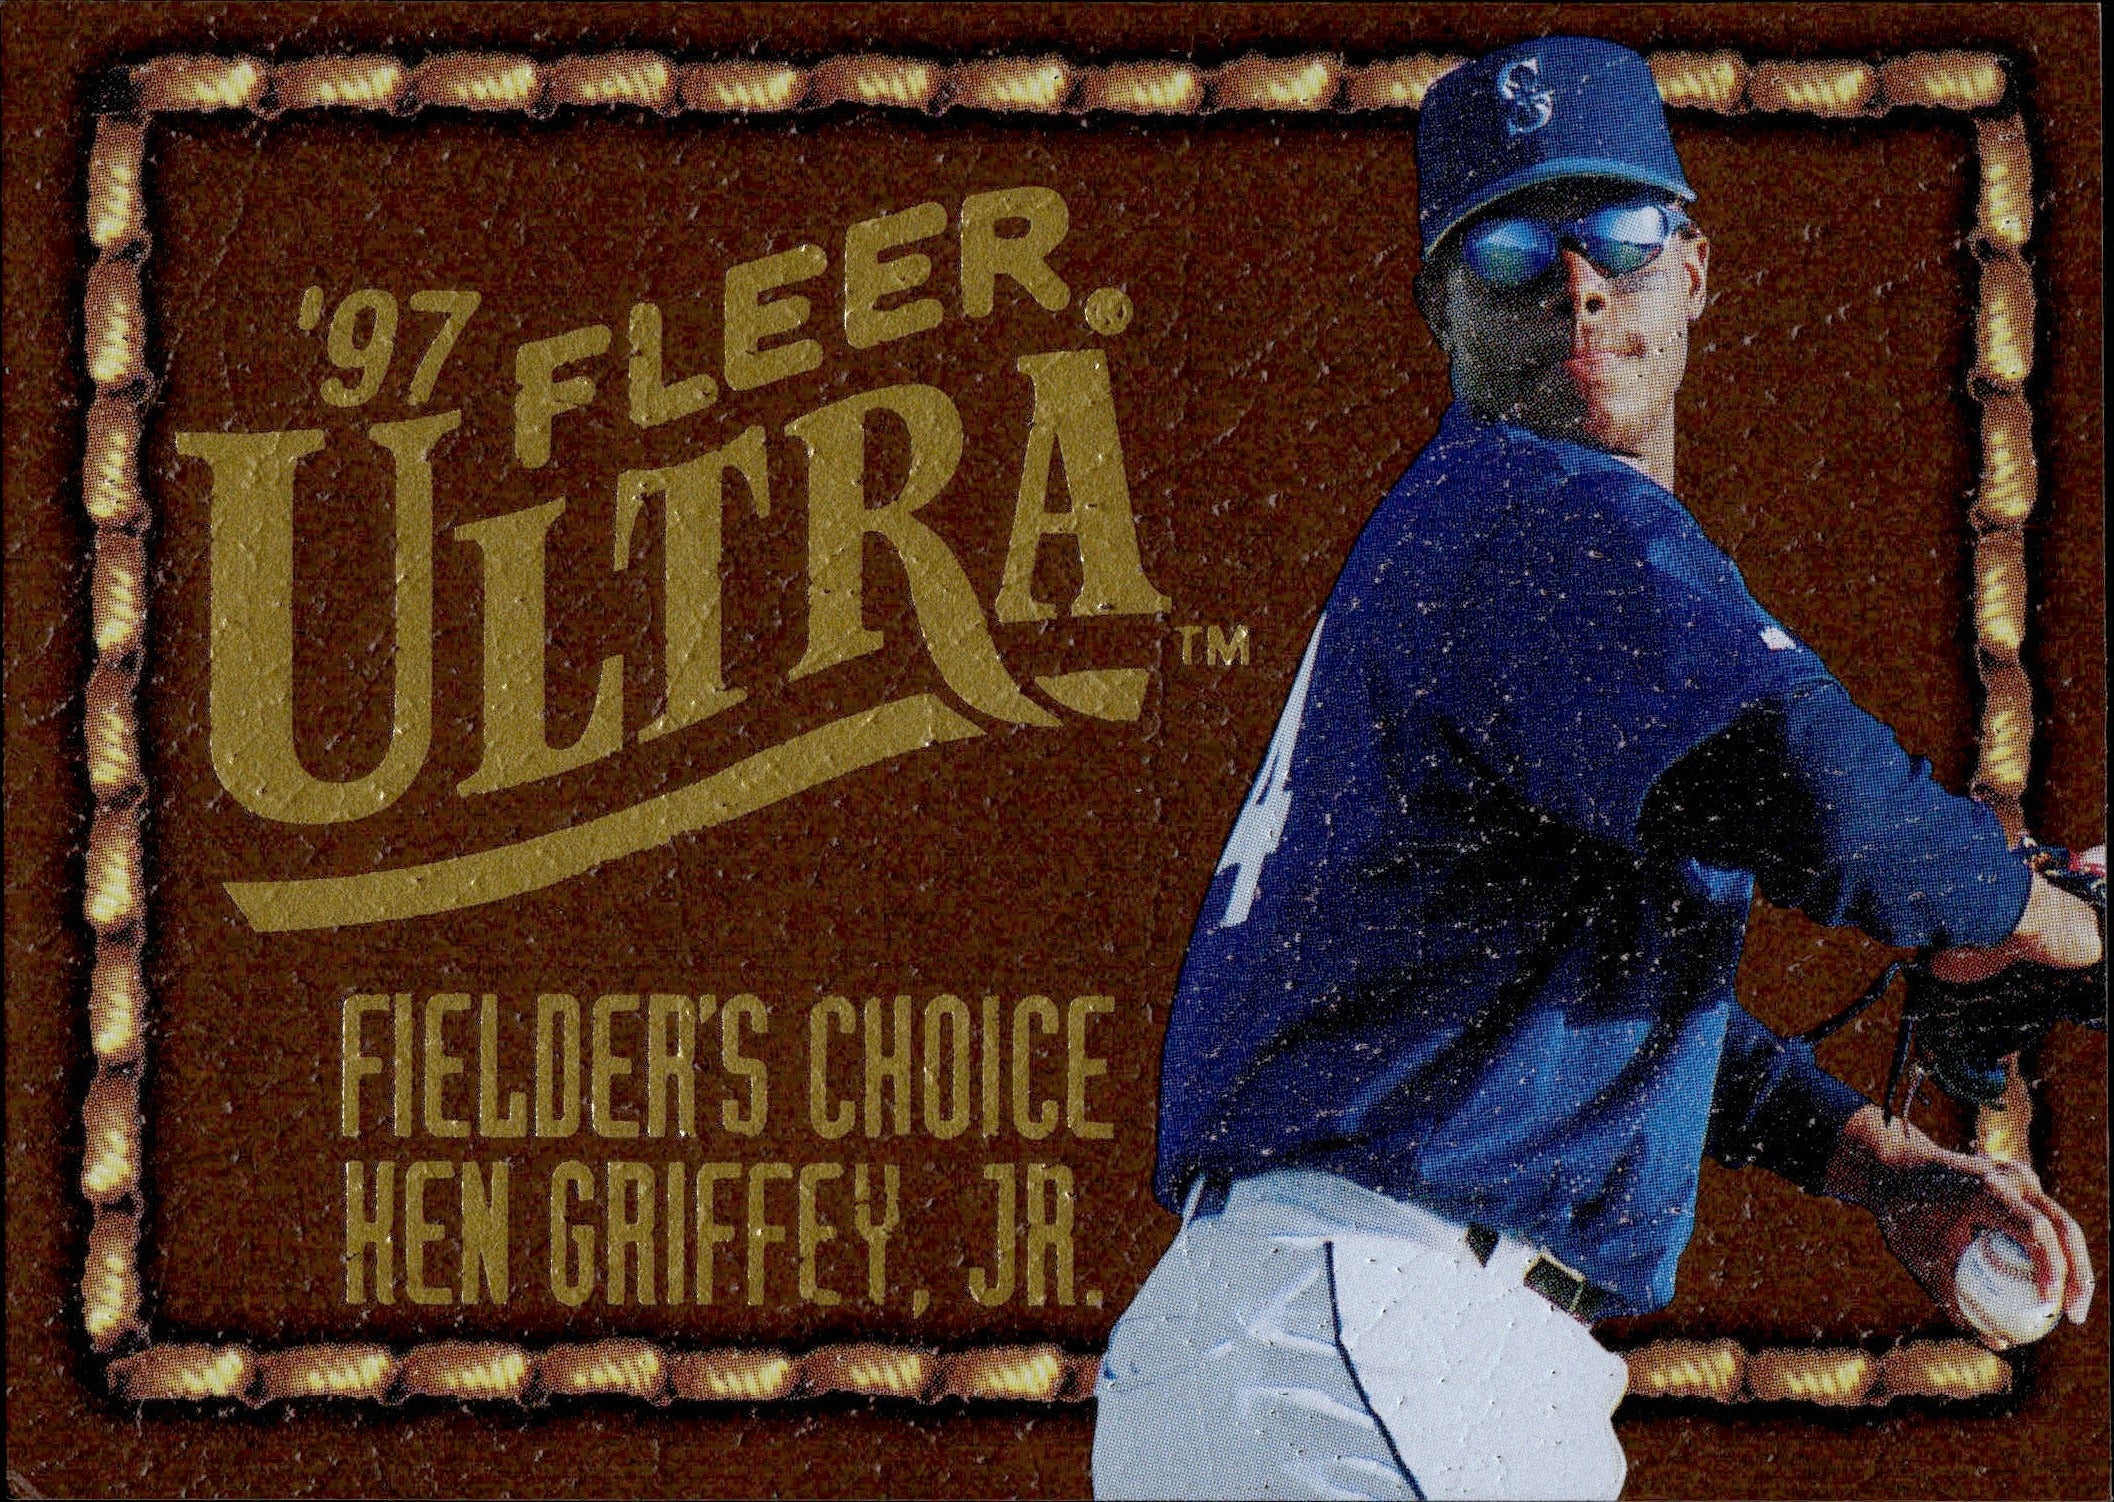 Seattle Mariners Ken Griffey Jr. #6, 35th Anniversary Patch MLB